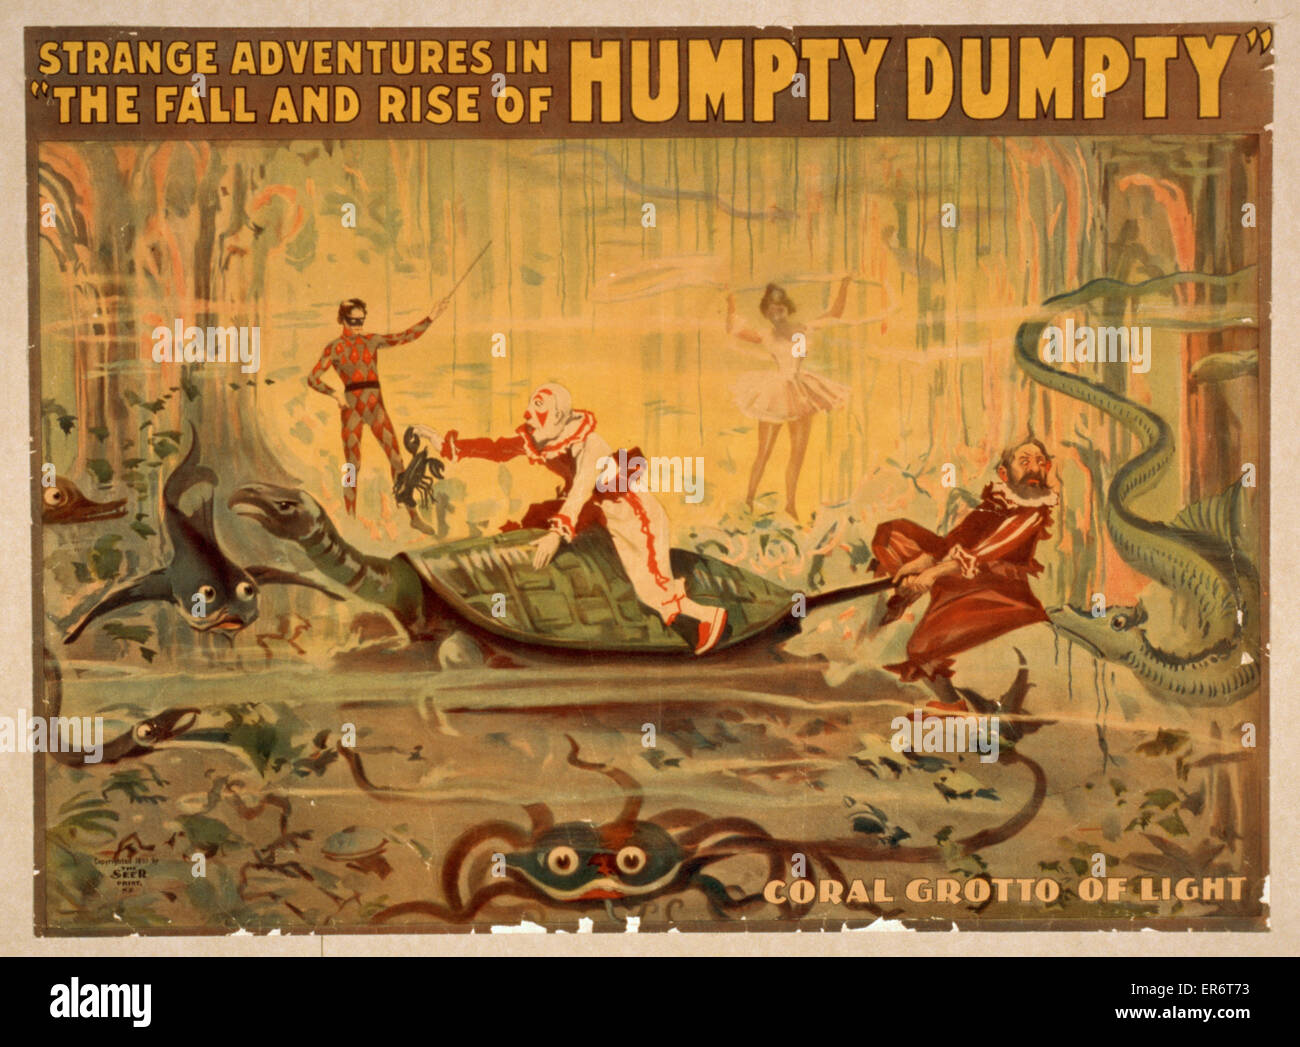 Strange adventures in The fall and rise of Humpty Dumpty Stock Photo